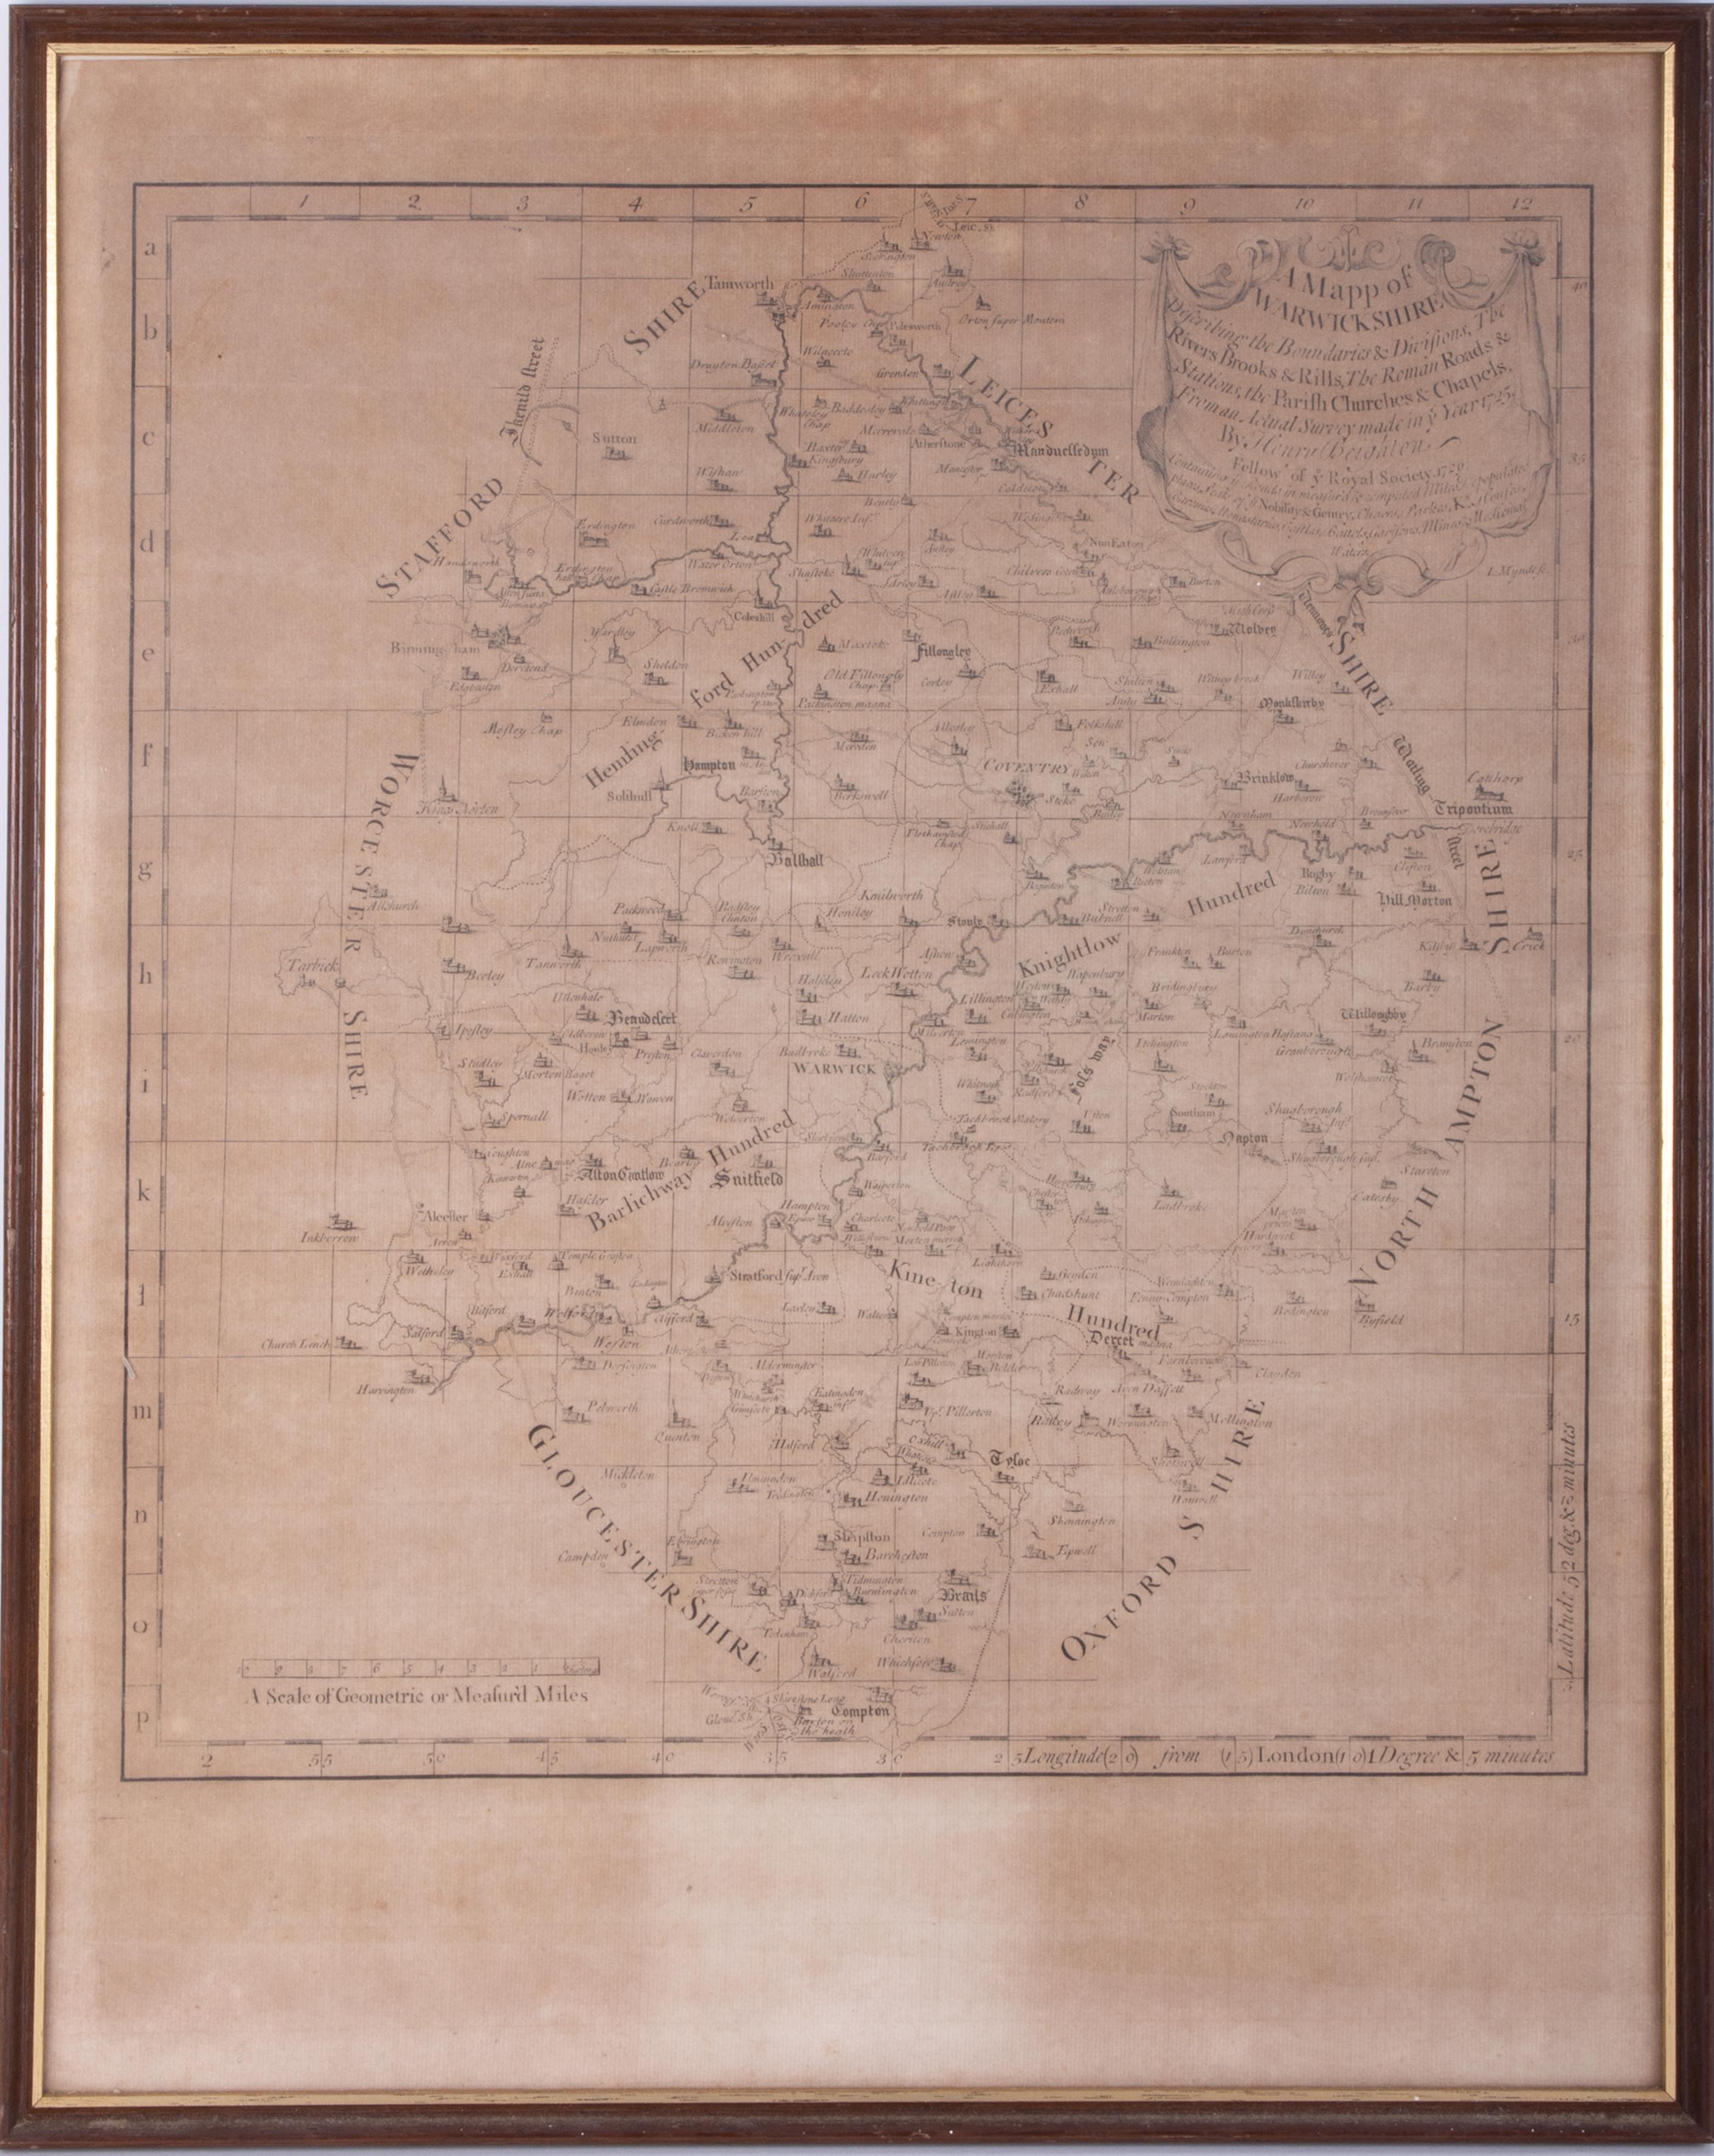 An 18th century map Warwickshire, Warwick, describing the boundaries and divisions, together with - Image 3 of 3